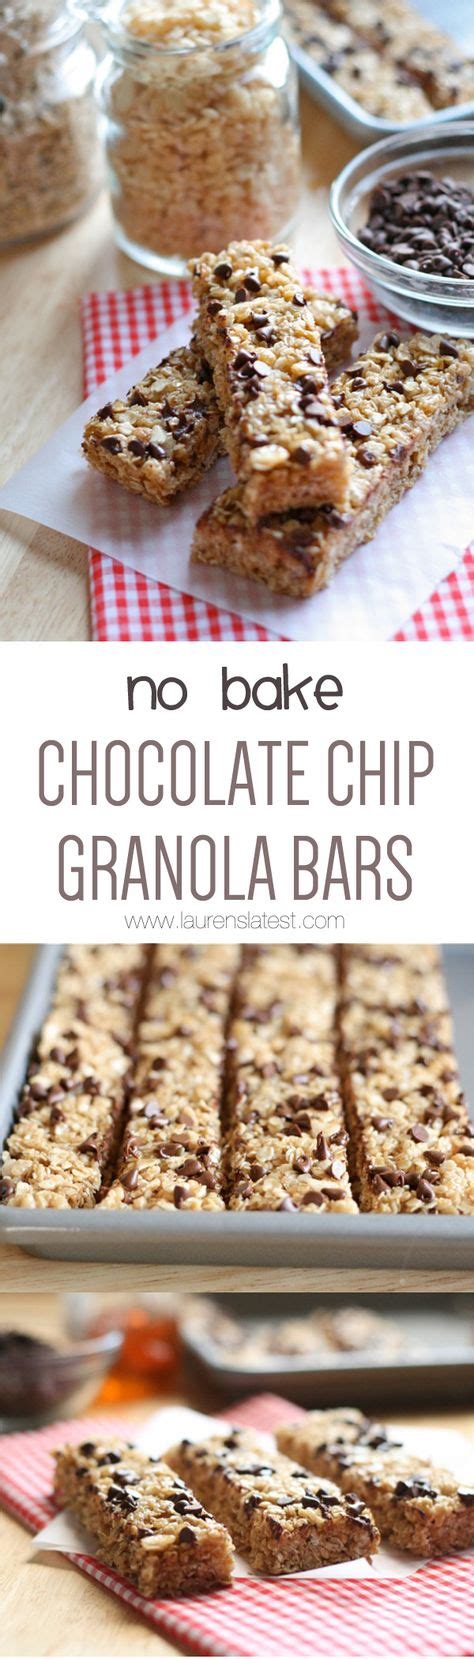 Keep the ratio of 5 ½ cups of dry ingredients to 1. No-Bake Chocolate Chip Granola Bars | Recipe | Chocolate ...